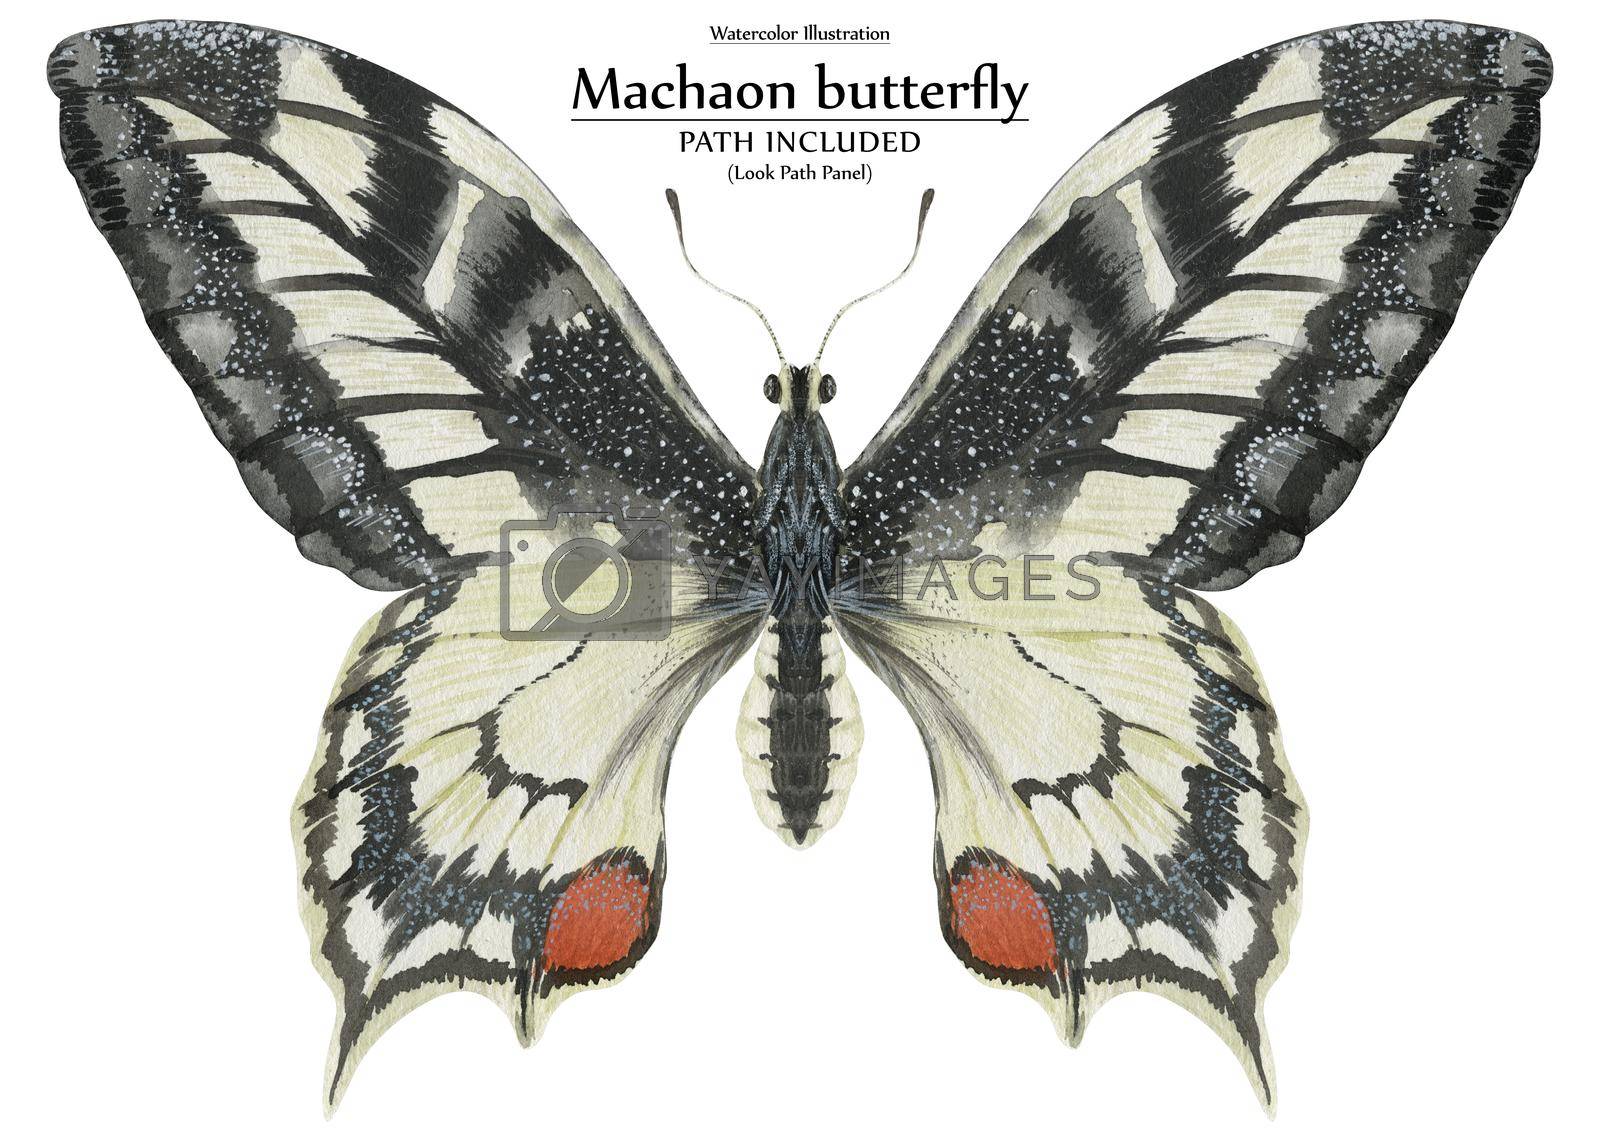 Royalty free image of Watercolor realistic biological art illustration Machaon butterfly by Xeniasnowstorm